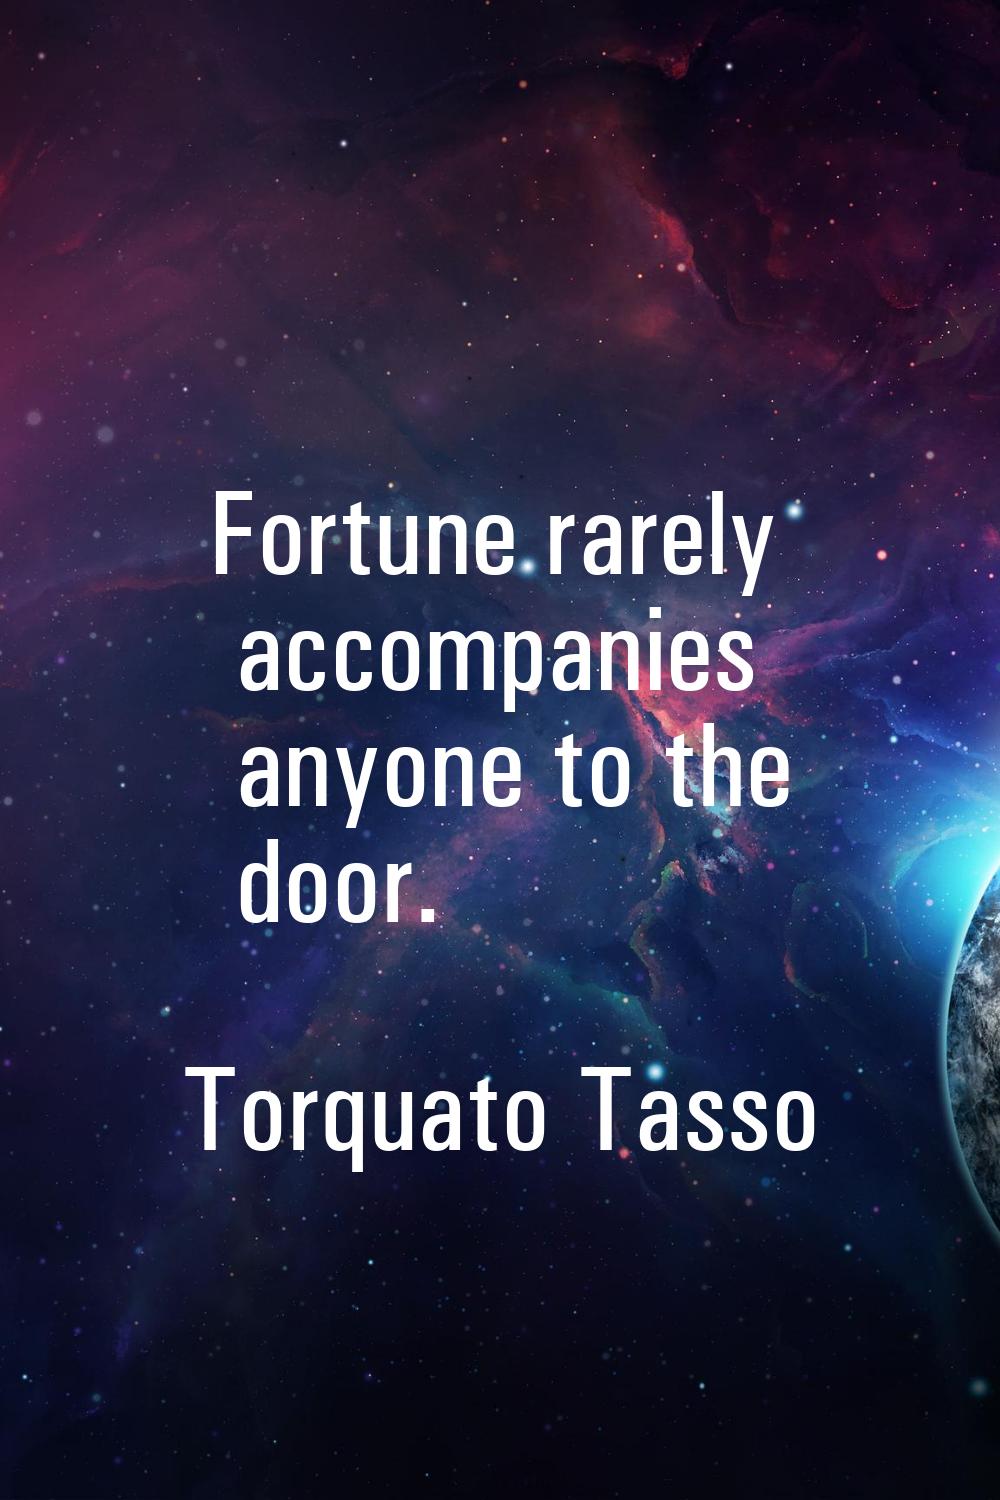 Fortune rarely accompanies anyone to the door.